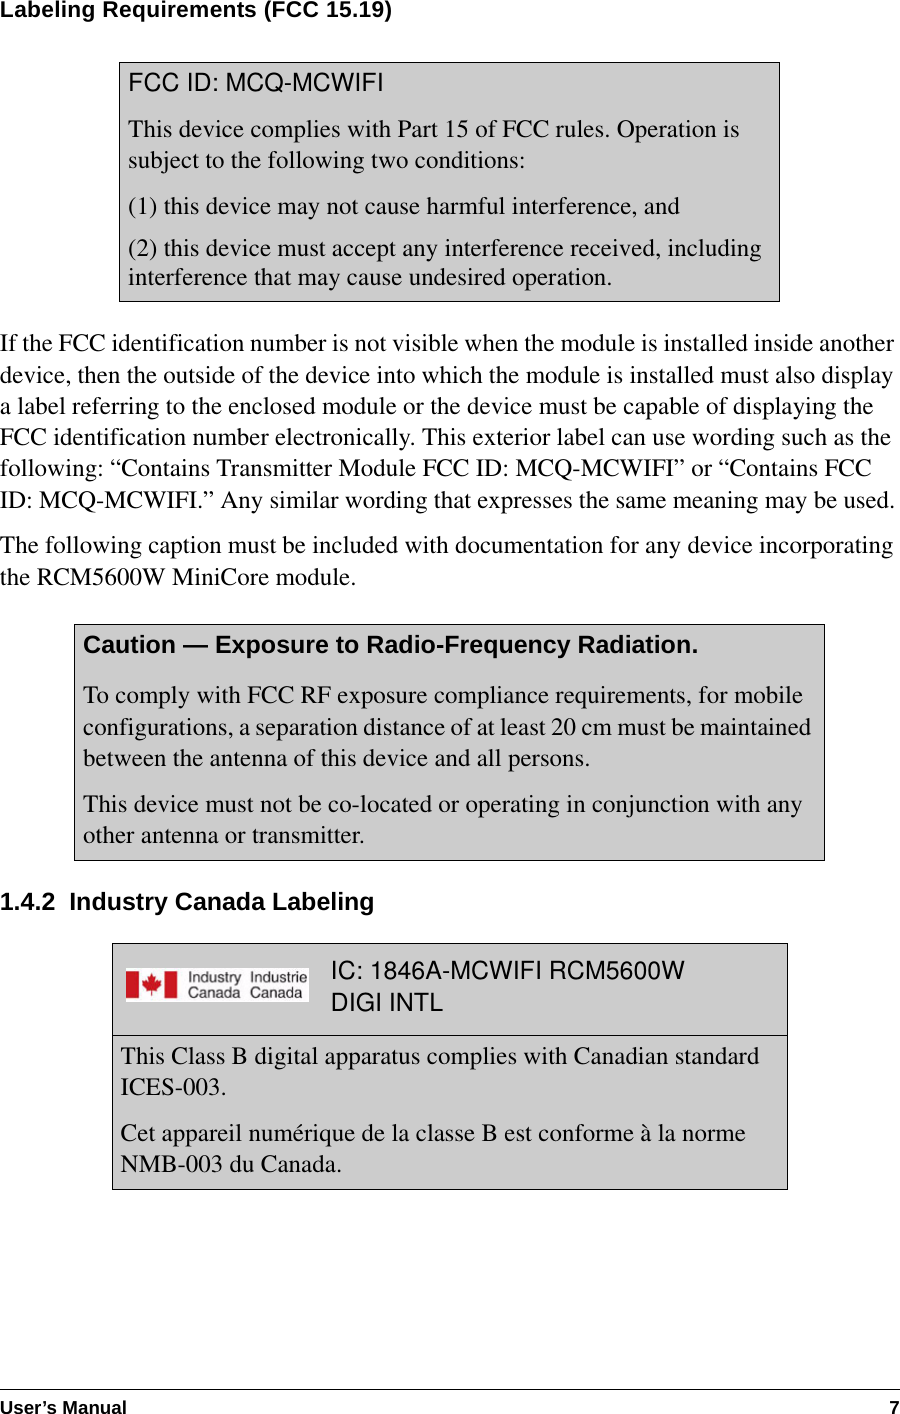 User’s Manual 7Labeling Requirements (FCC 15.19)If the FCC identification number is not visible when the module is installed inside another device, then the outside of the device into which the module is installed must also display a label referring to the enclosed module or the device must be capable of displaying the FCC identification number electronically. This exterior label can use wording such as the following: “Contains Transmitter Module FCC ID: MCQ-MCWIFI” or “Contains FCC ID: MCQ-MCWIFI.” Any similar wording that expresses the same meaning may be used.The following caption must be included with documentation for any device incorporating the RCM5600W MiniCore module.1.4.2  Industry Canada LabelingFCC ID: MCQ-MCWIFIThis device complies with Part 15 of FCC rules. Operation is subject to the following two conditions:(1) this device may not cause harmful interference, and(2) this device must accept any interference received, including interference that may cause undesired operation.Caution — Exposure to Radio-Frequency Radiation.To comply with FCC RF exposure compliance requirements, for mobile configurations, a separation distance of at least 20 cm must be maintained between the antenna of this device and all persons. This device must not be co-located or operating in conjunction with any other antenna or transmitter.IC: 1846A-MCWIFI RCM5600WDIGI INTLThis Class B digital apparatus complies with Canadian standard ICES-003.Cet appareil numérique de la classe B est conforme à la norme NMB-003 du Canada.